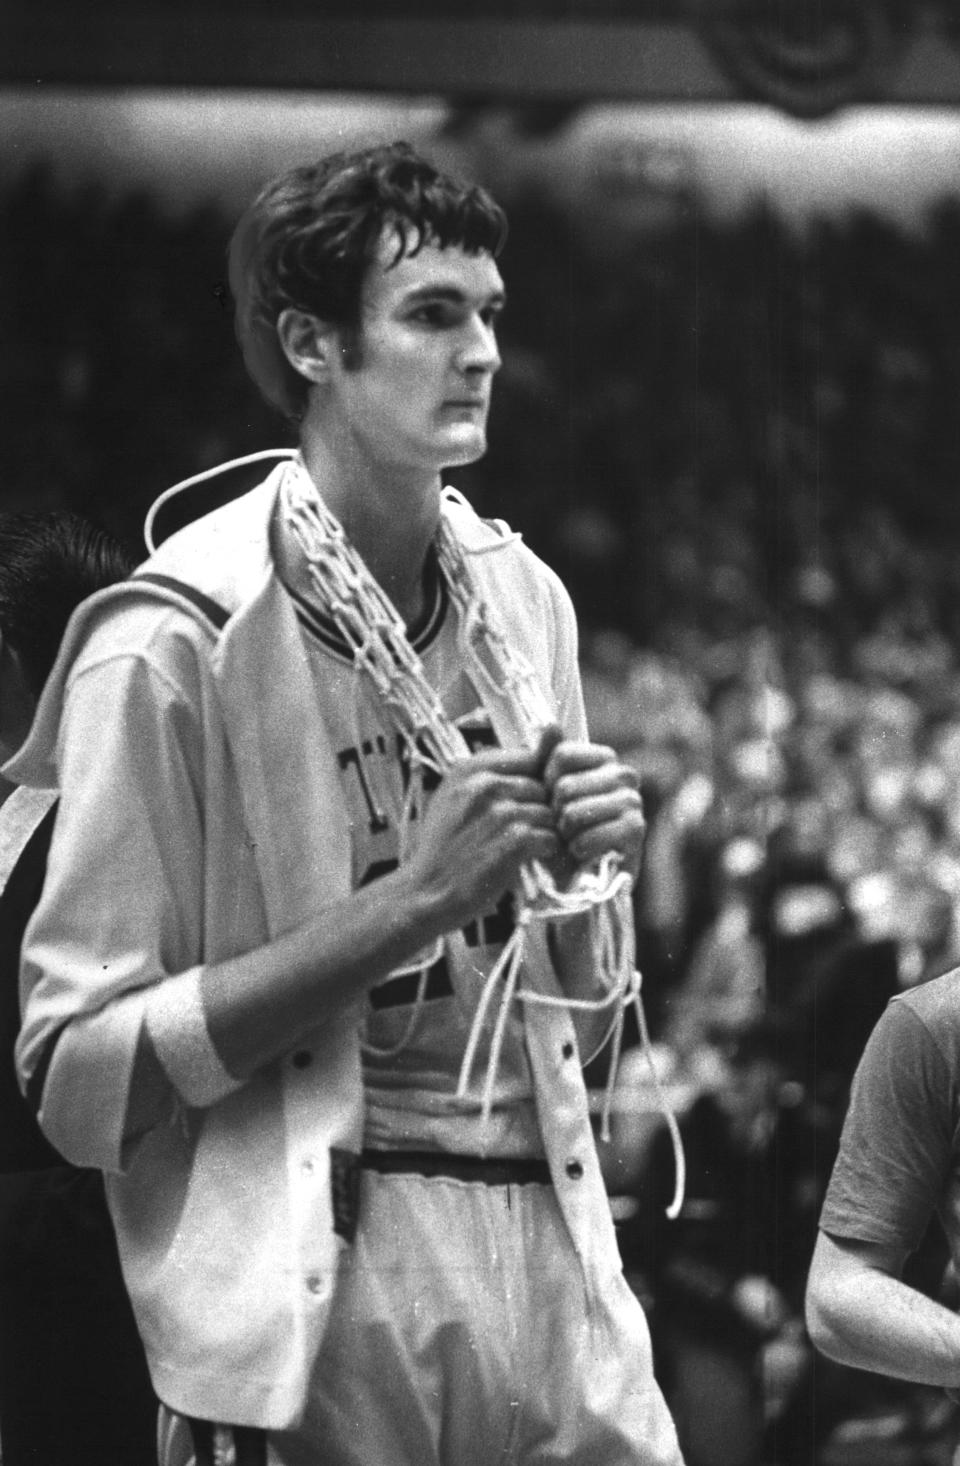 Tom Burleson, North Carolina State's 7 foot 4 inch center had the net draped around his neck after the Wolfpack defeated Marquette for the National Collegiate Athletic Association Basketball tournament title on March 25, 1974, at Greensboro, NC., 76-64.